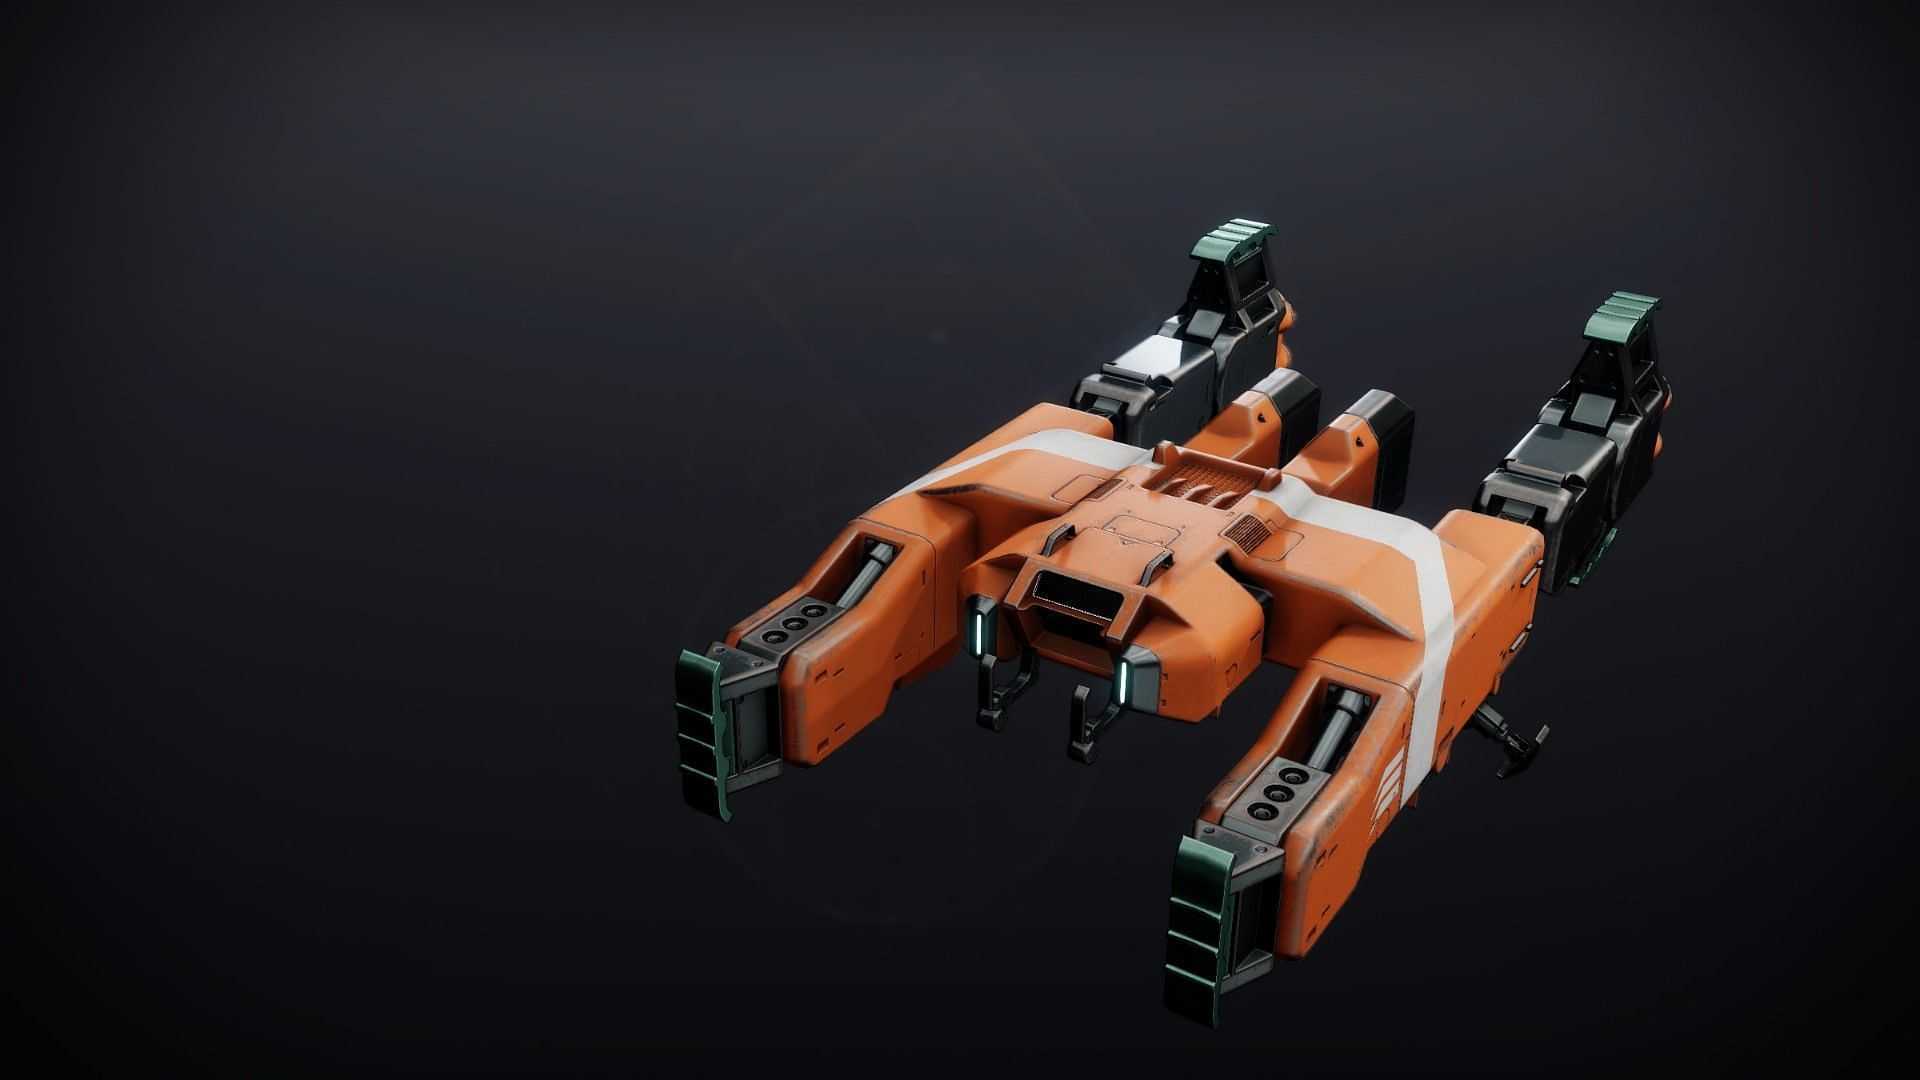 The Gigantes Carrier Exotic ship (Image via Bungie)